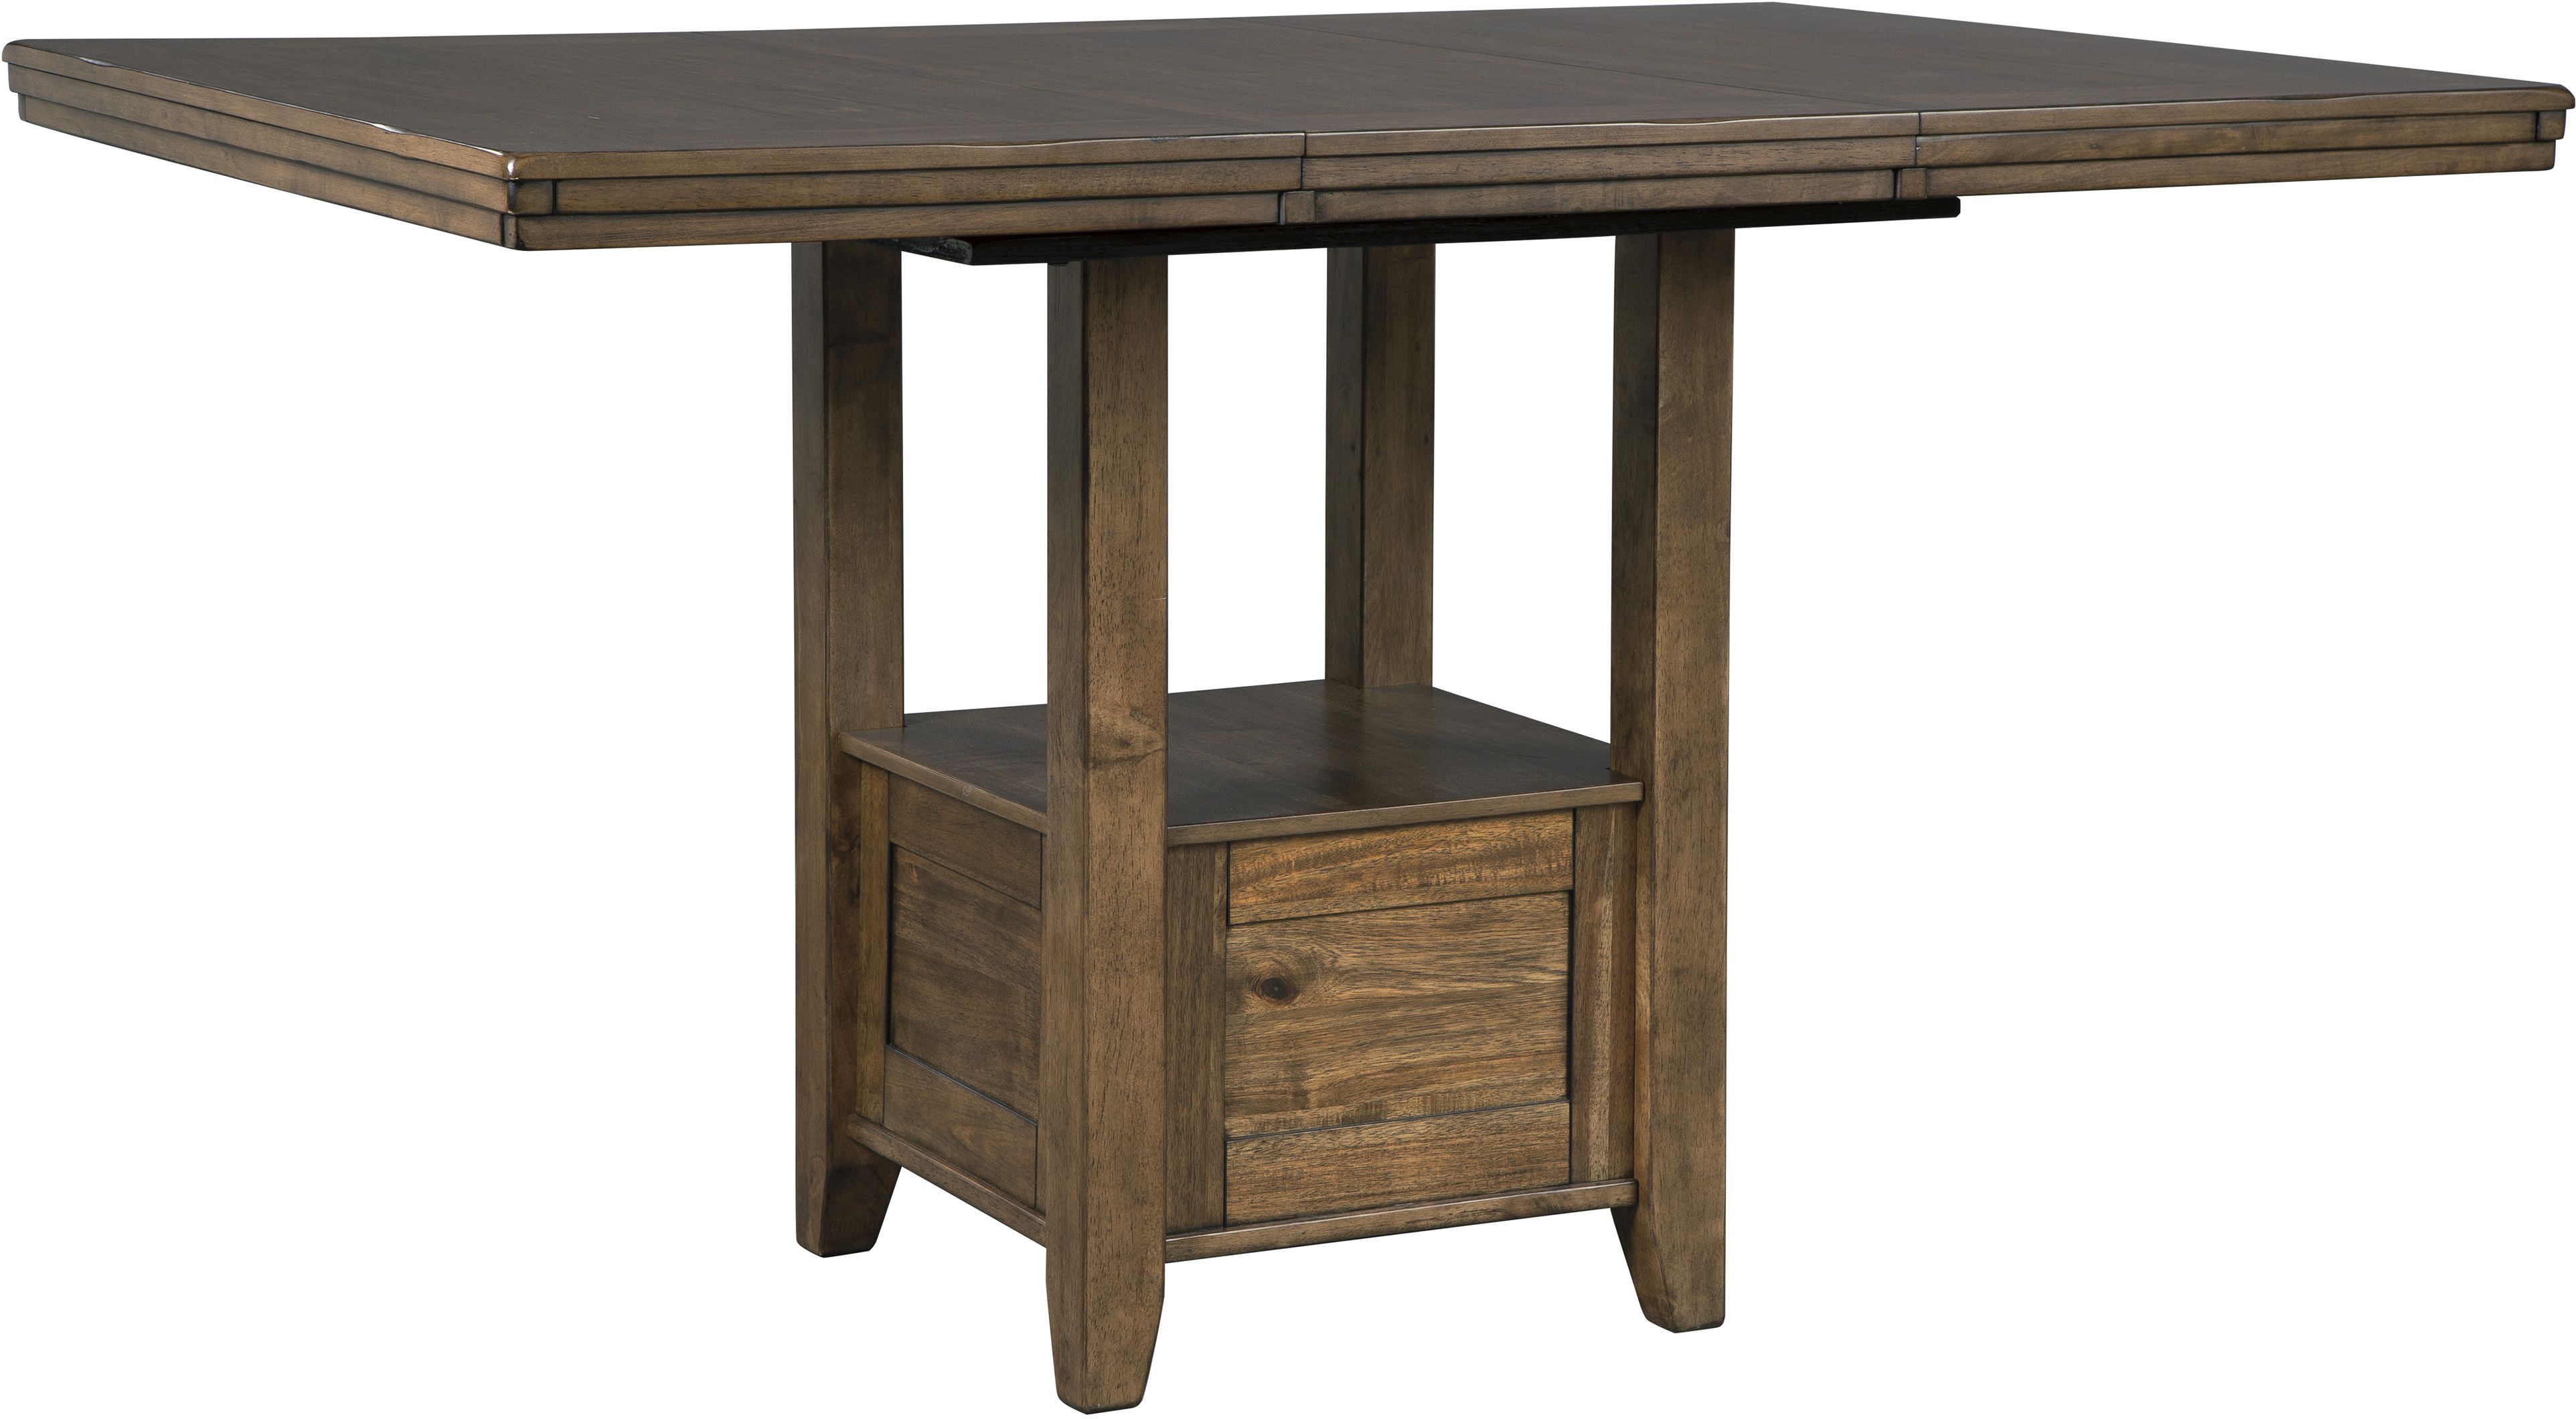 Benchcraft® Flaybern Brown Rectangular Dining Room Counter Extension Table